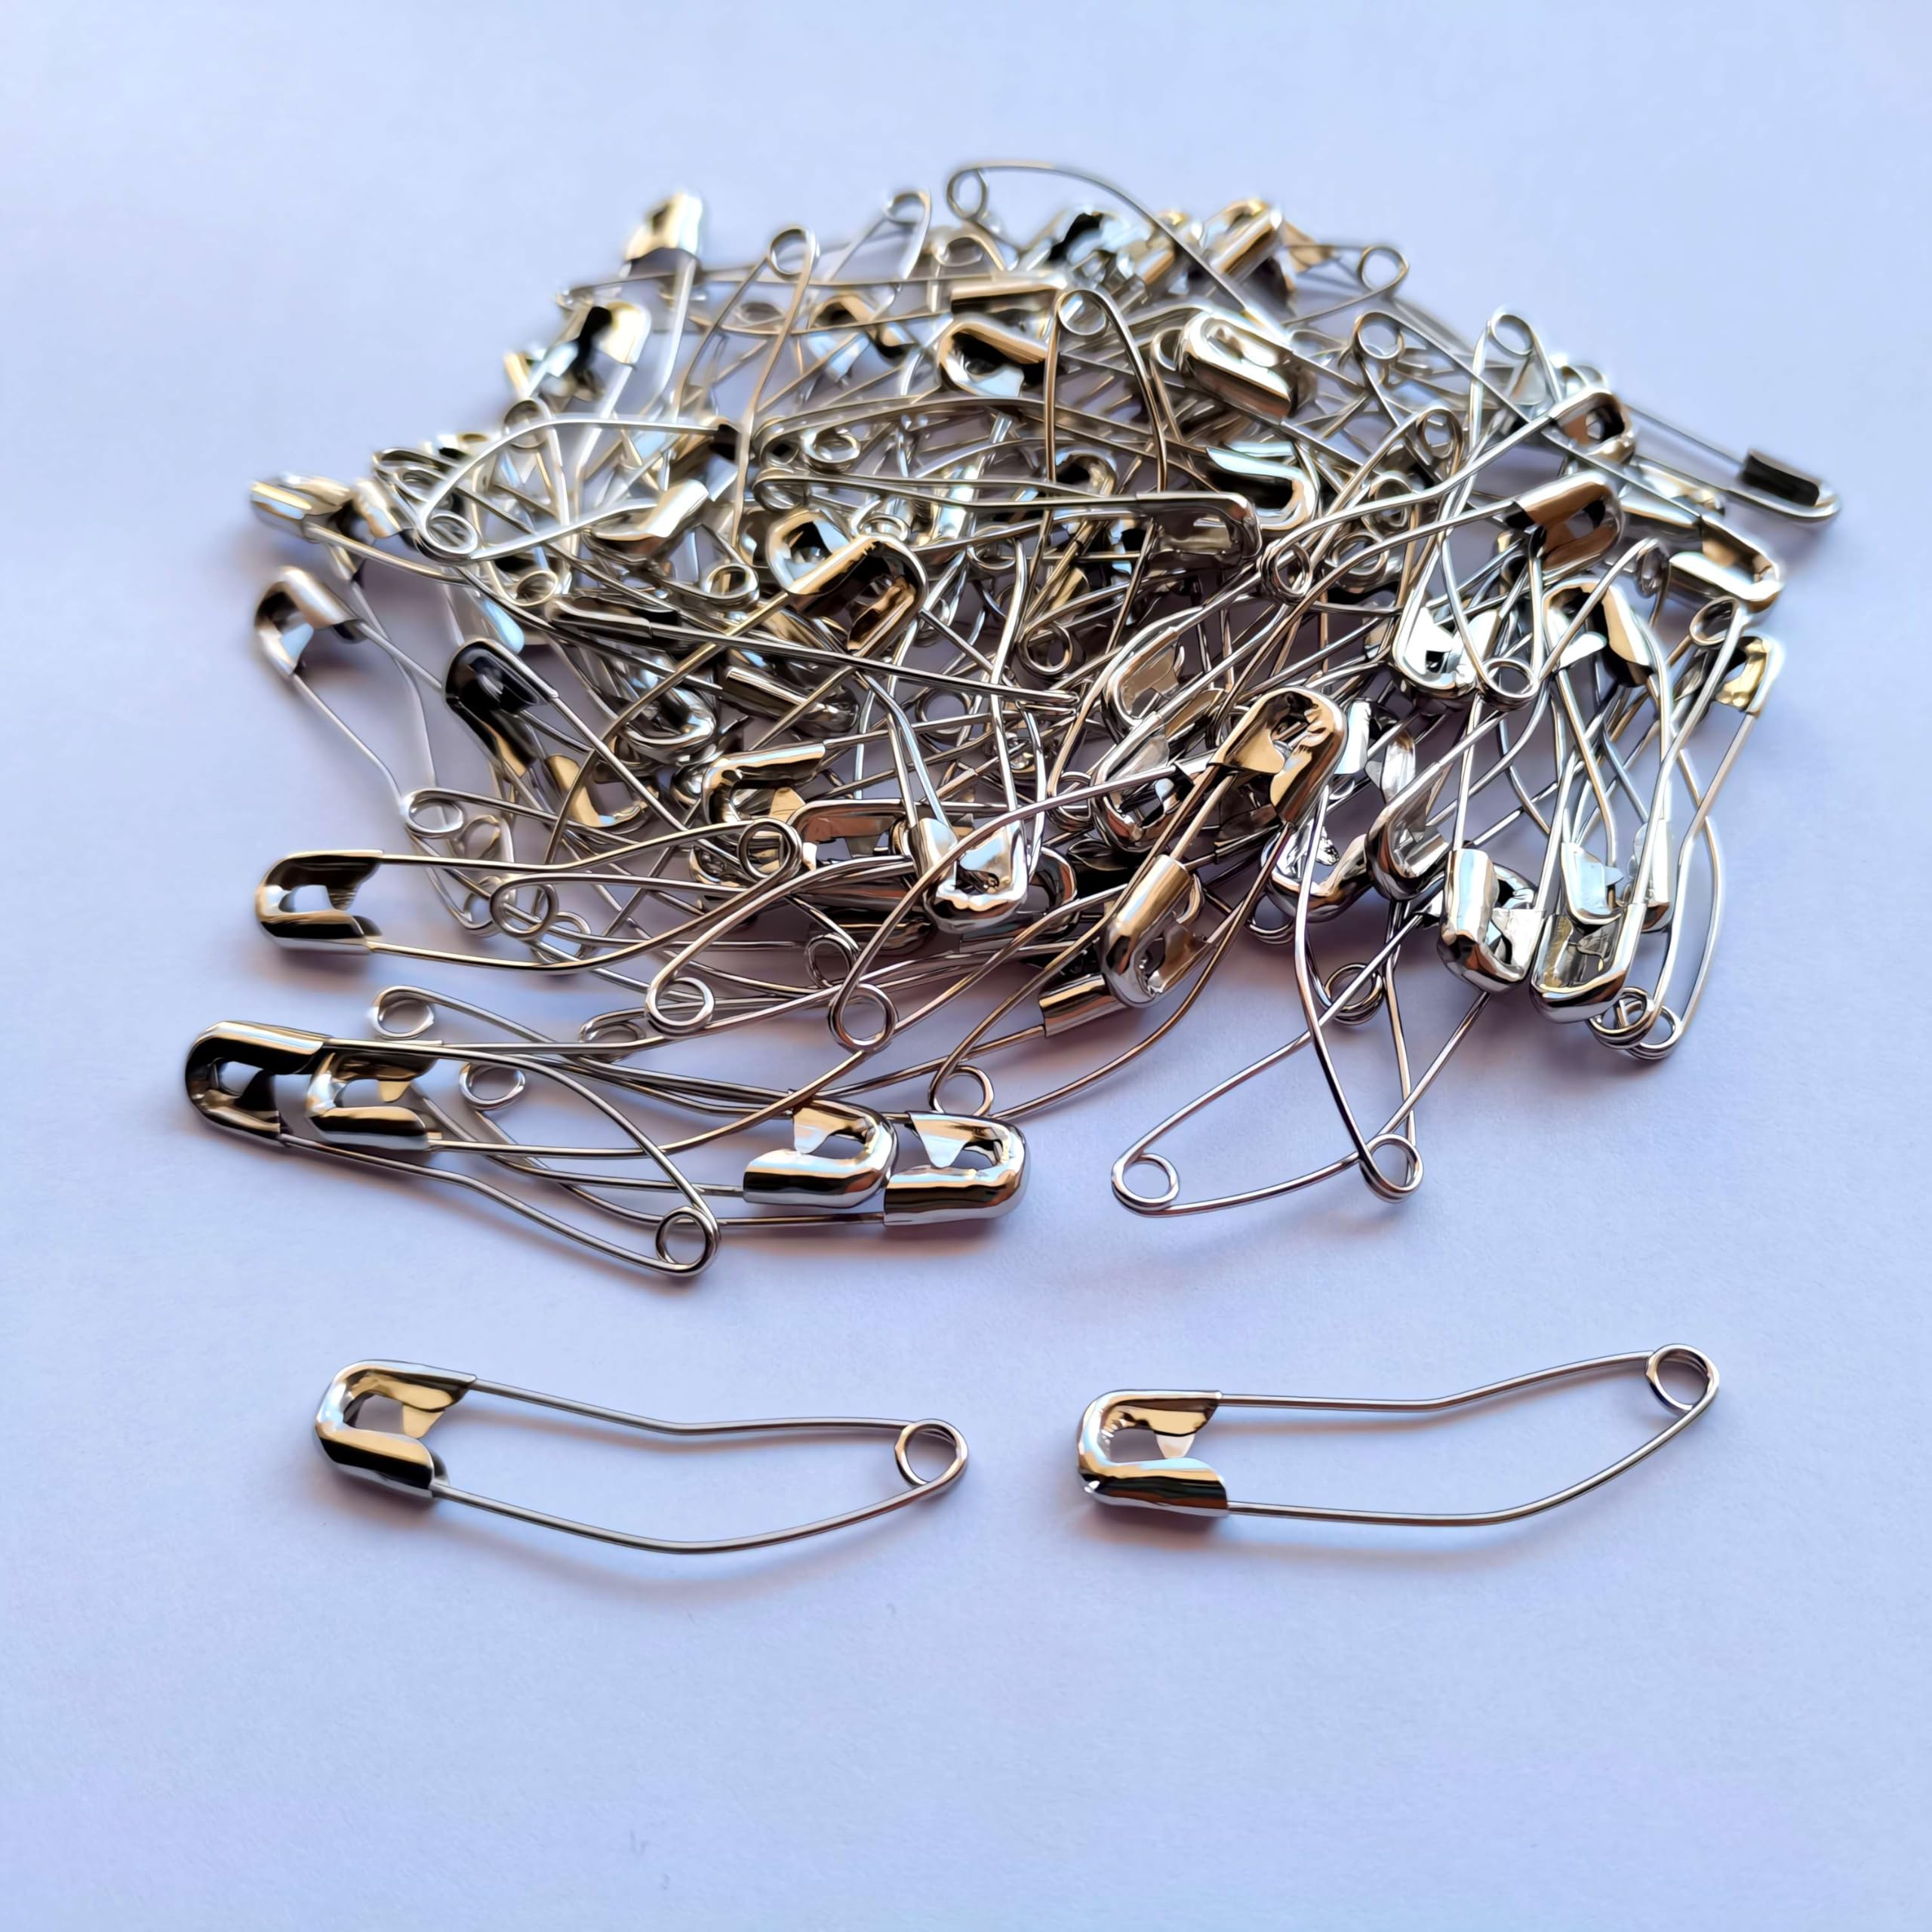 ibotti Curved Safety Pins for Quilting, Basting Pins, Size 2, 100-count